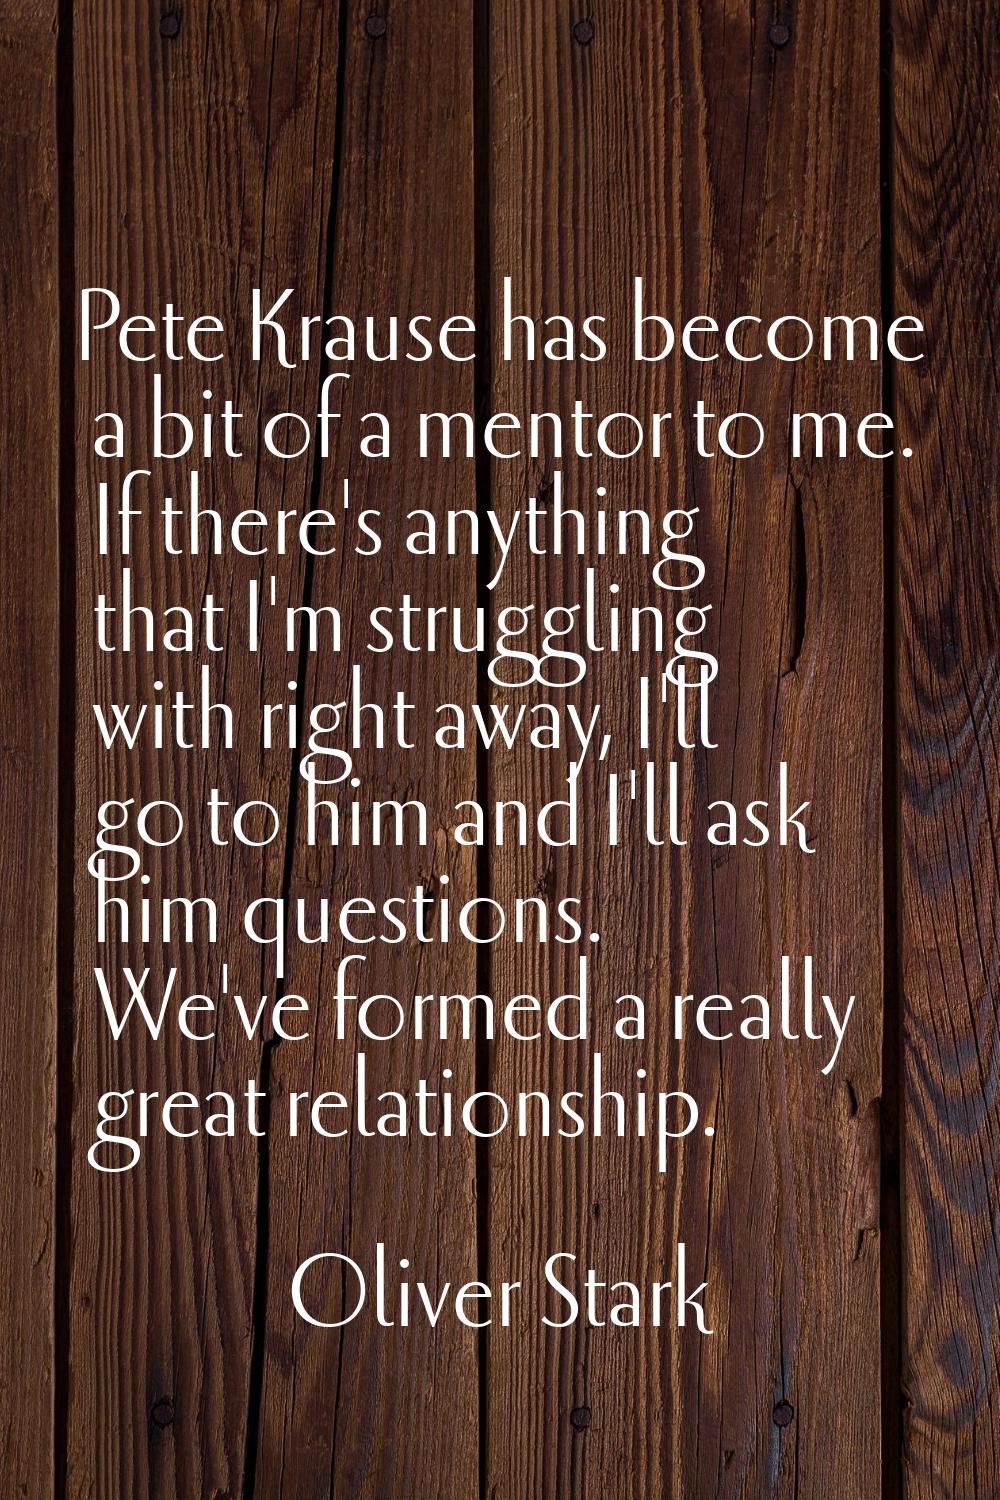 Pete Krause has become a bit of a mentor to me. If there's anything that I'm struggling with right 